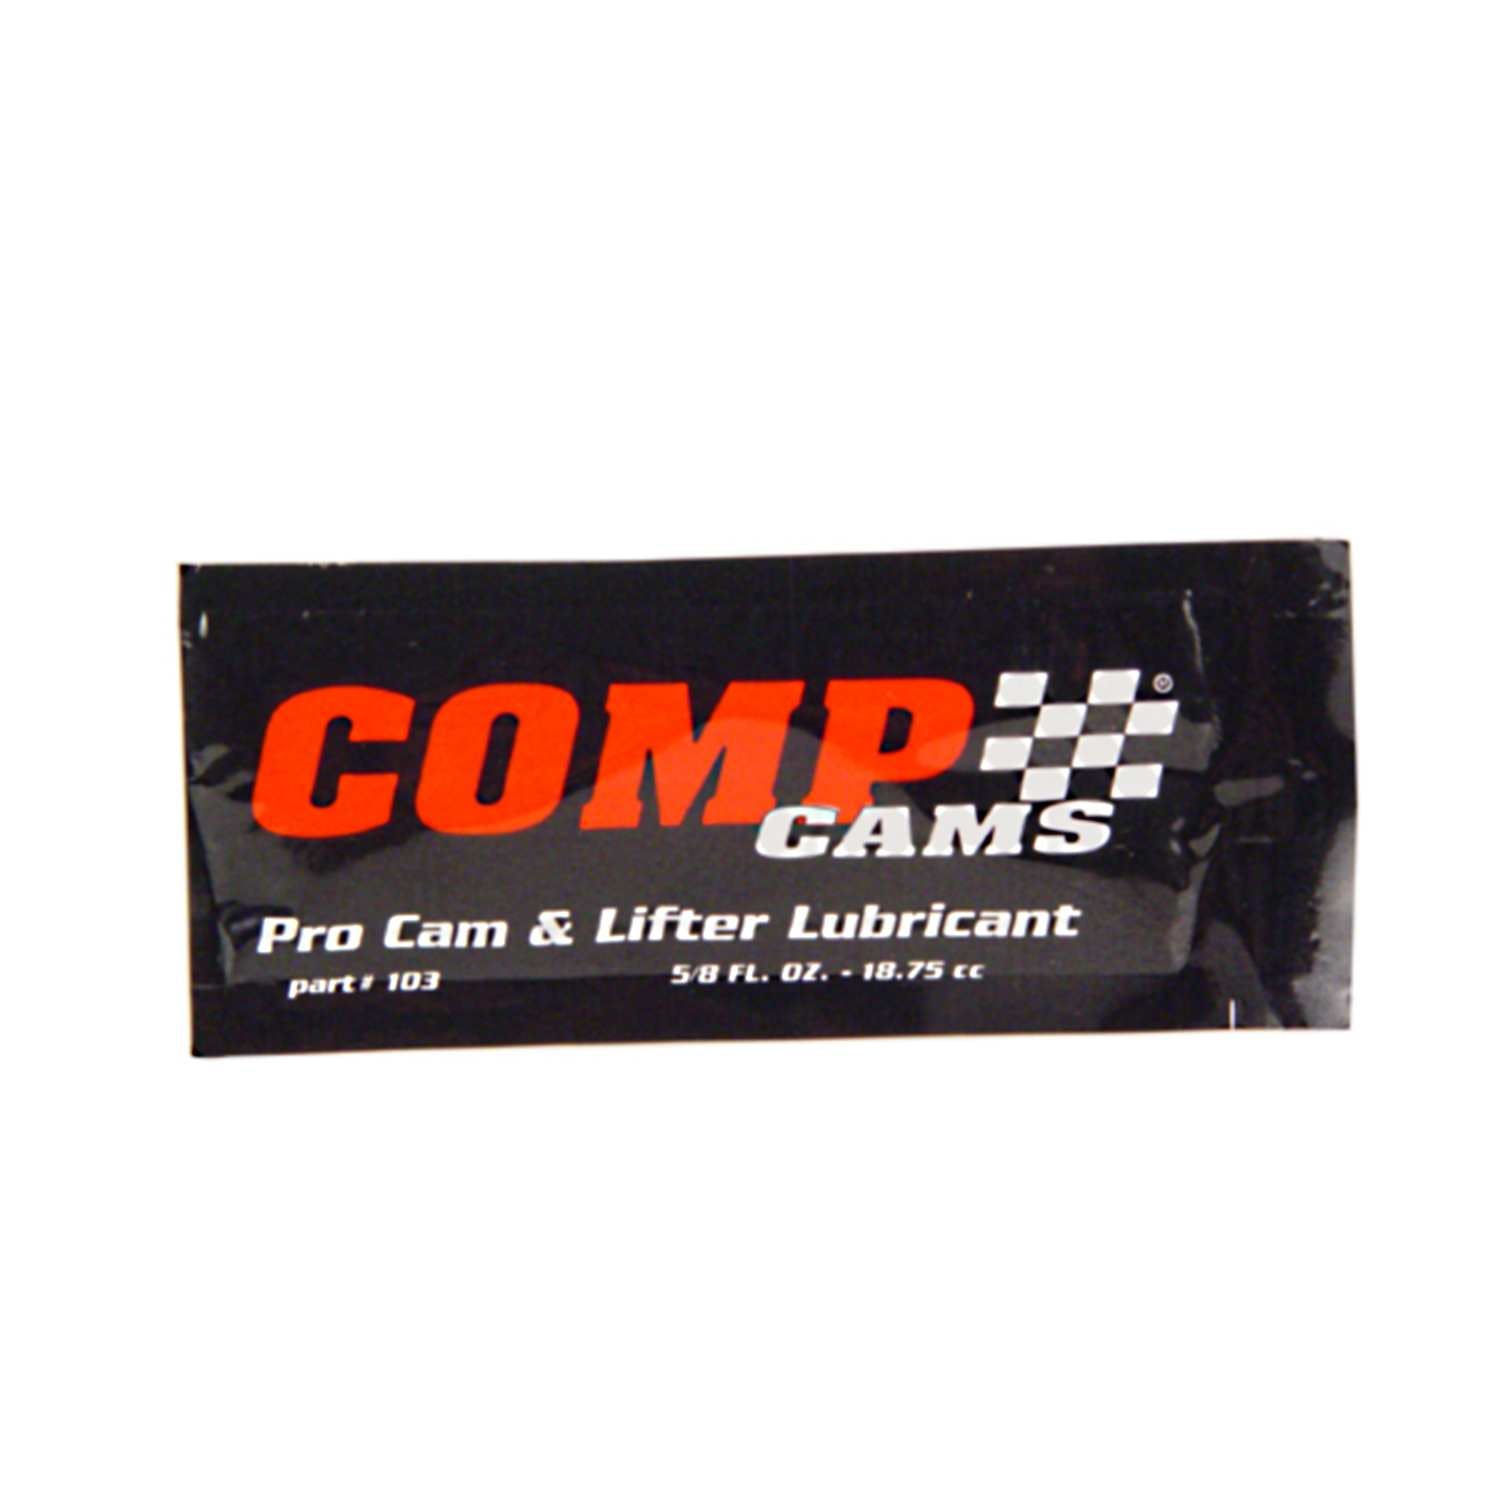 Competition Cams 103 Pro Cam Lube Lubricants